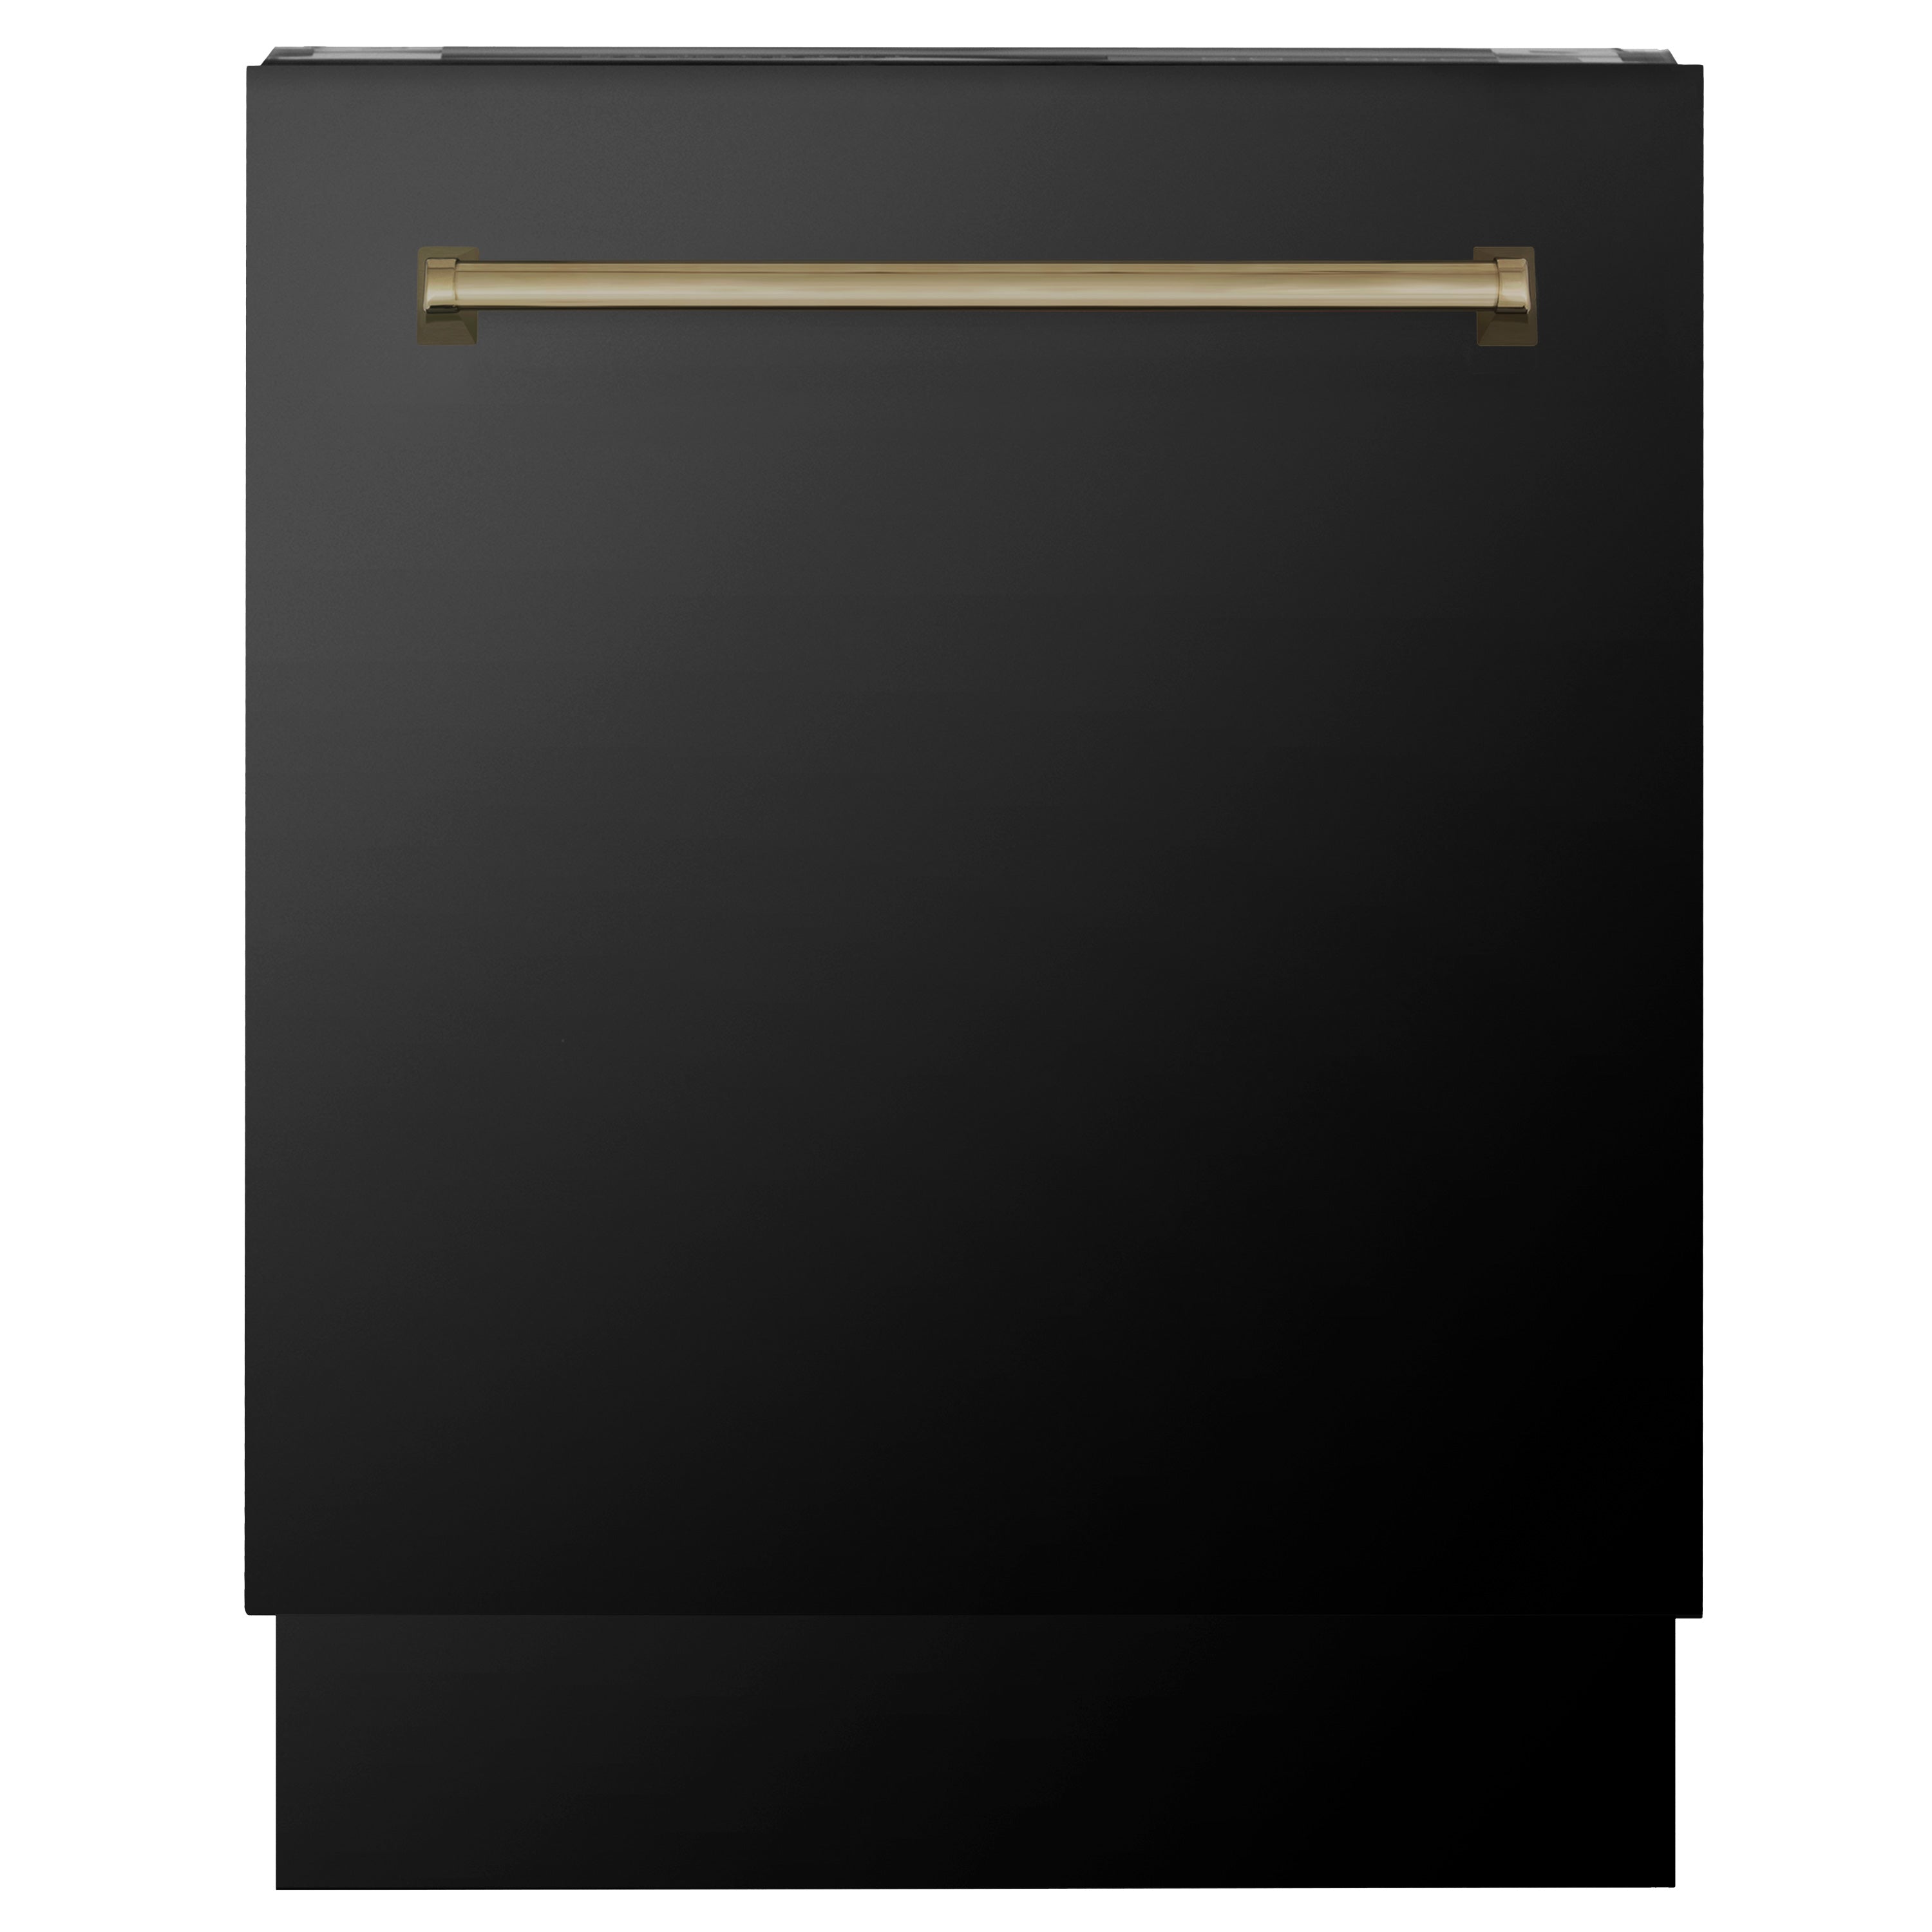 ZLINE Autograph Edition 24" Black Stainless Steel Dishwasher with Champagne Bronze handle (DWVZ-BS-24-CB) front, door closed.